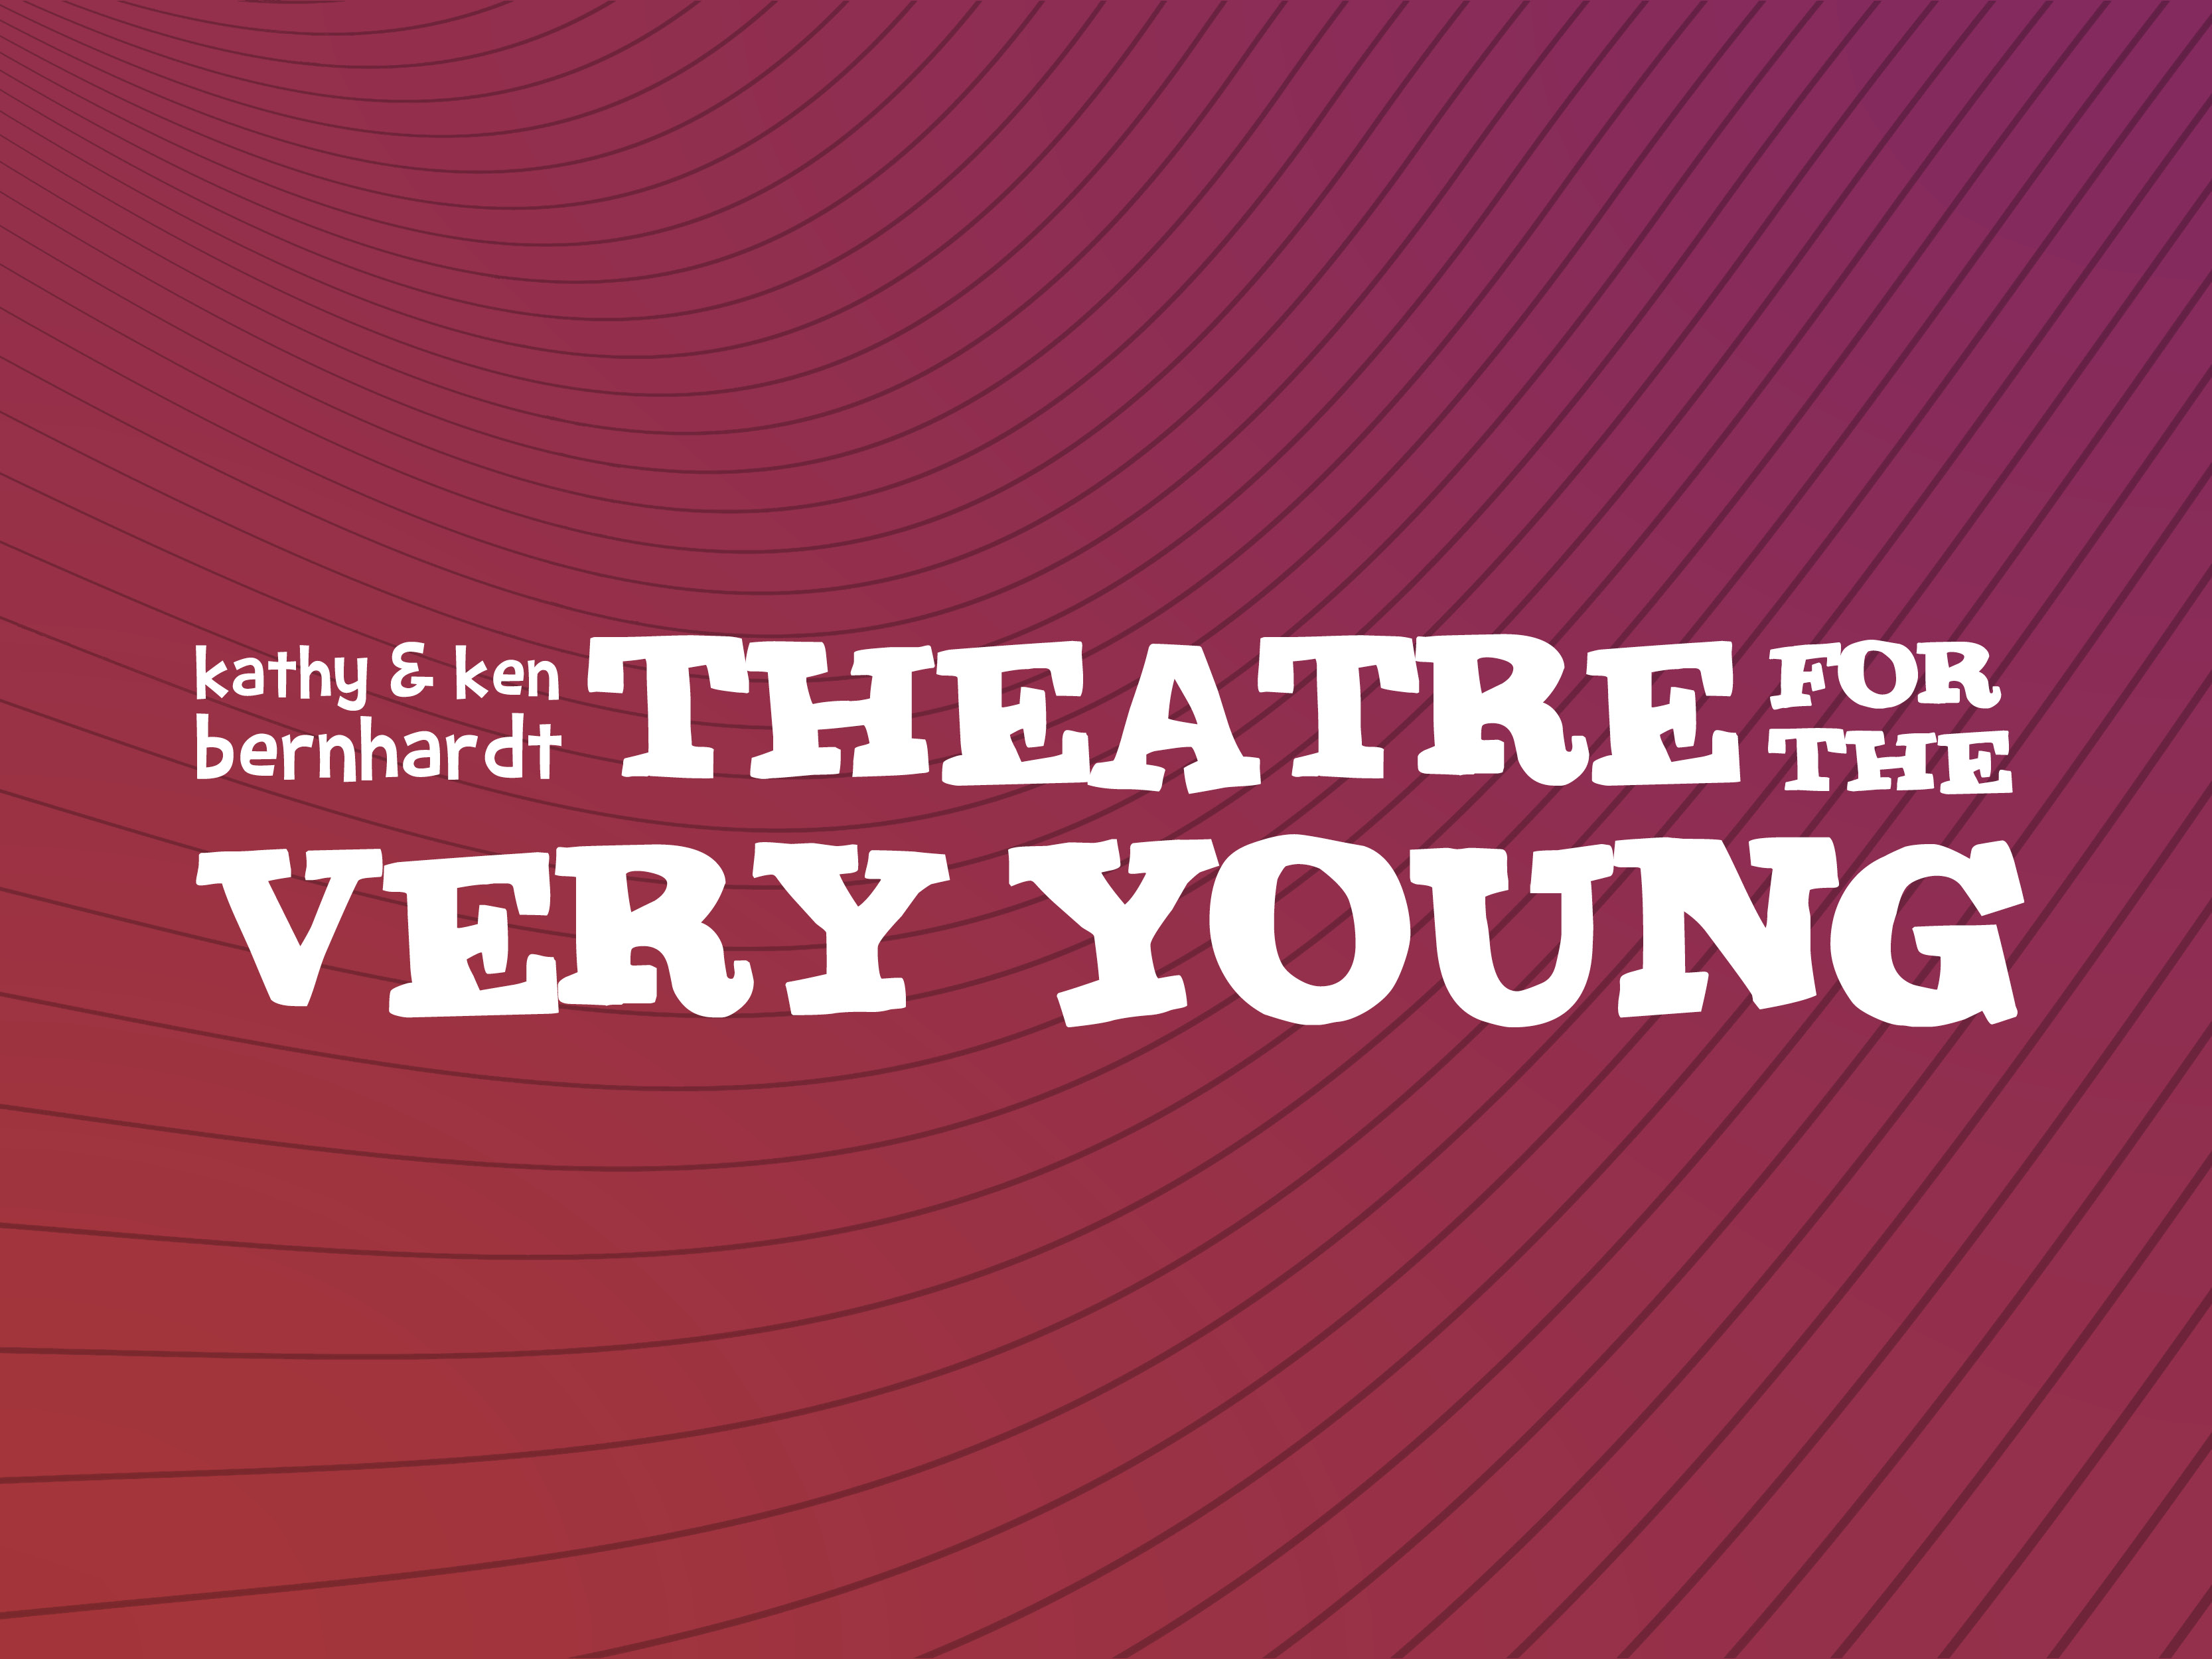 The Kathy & Ken Bernhardt Theatre for the Very Young Package